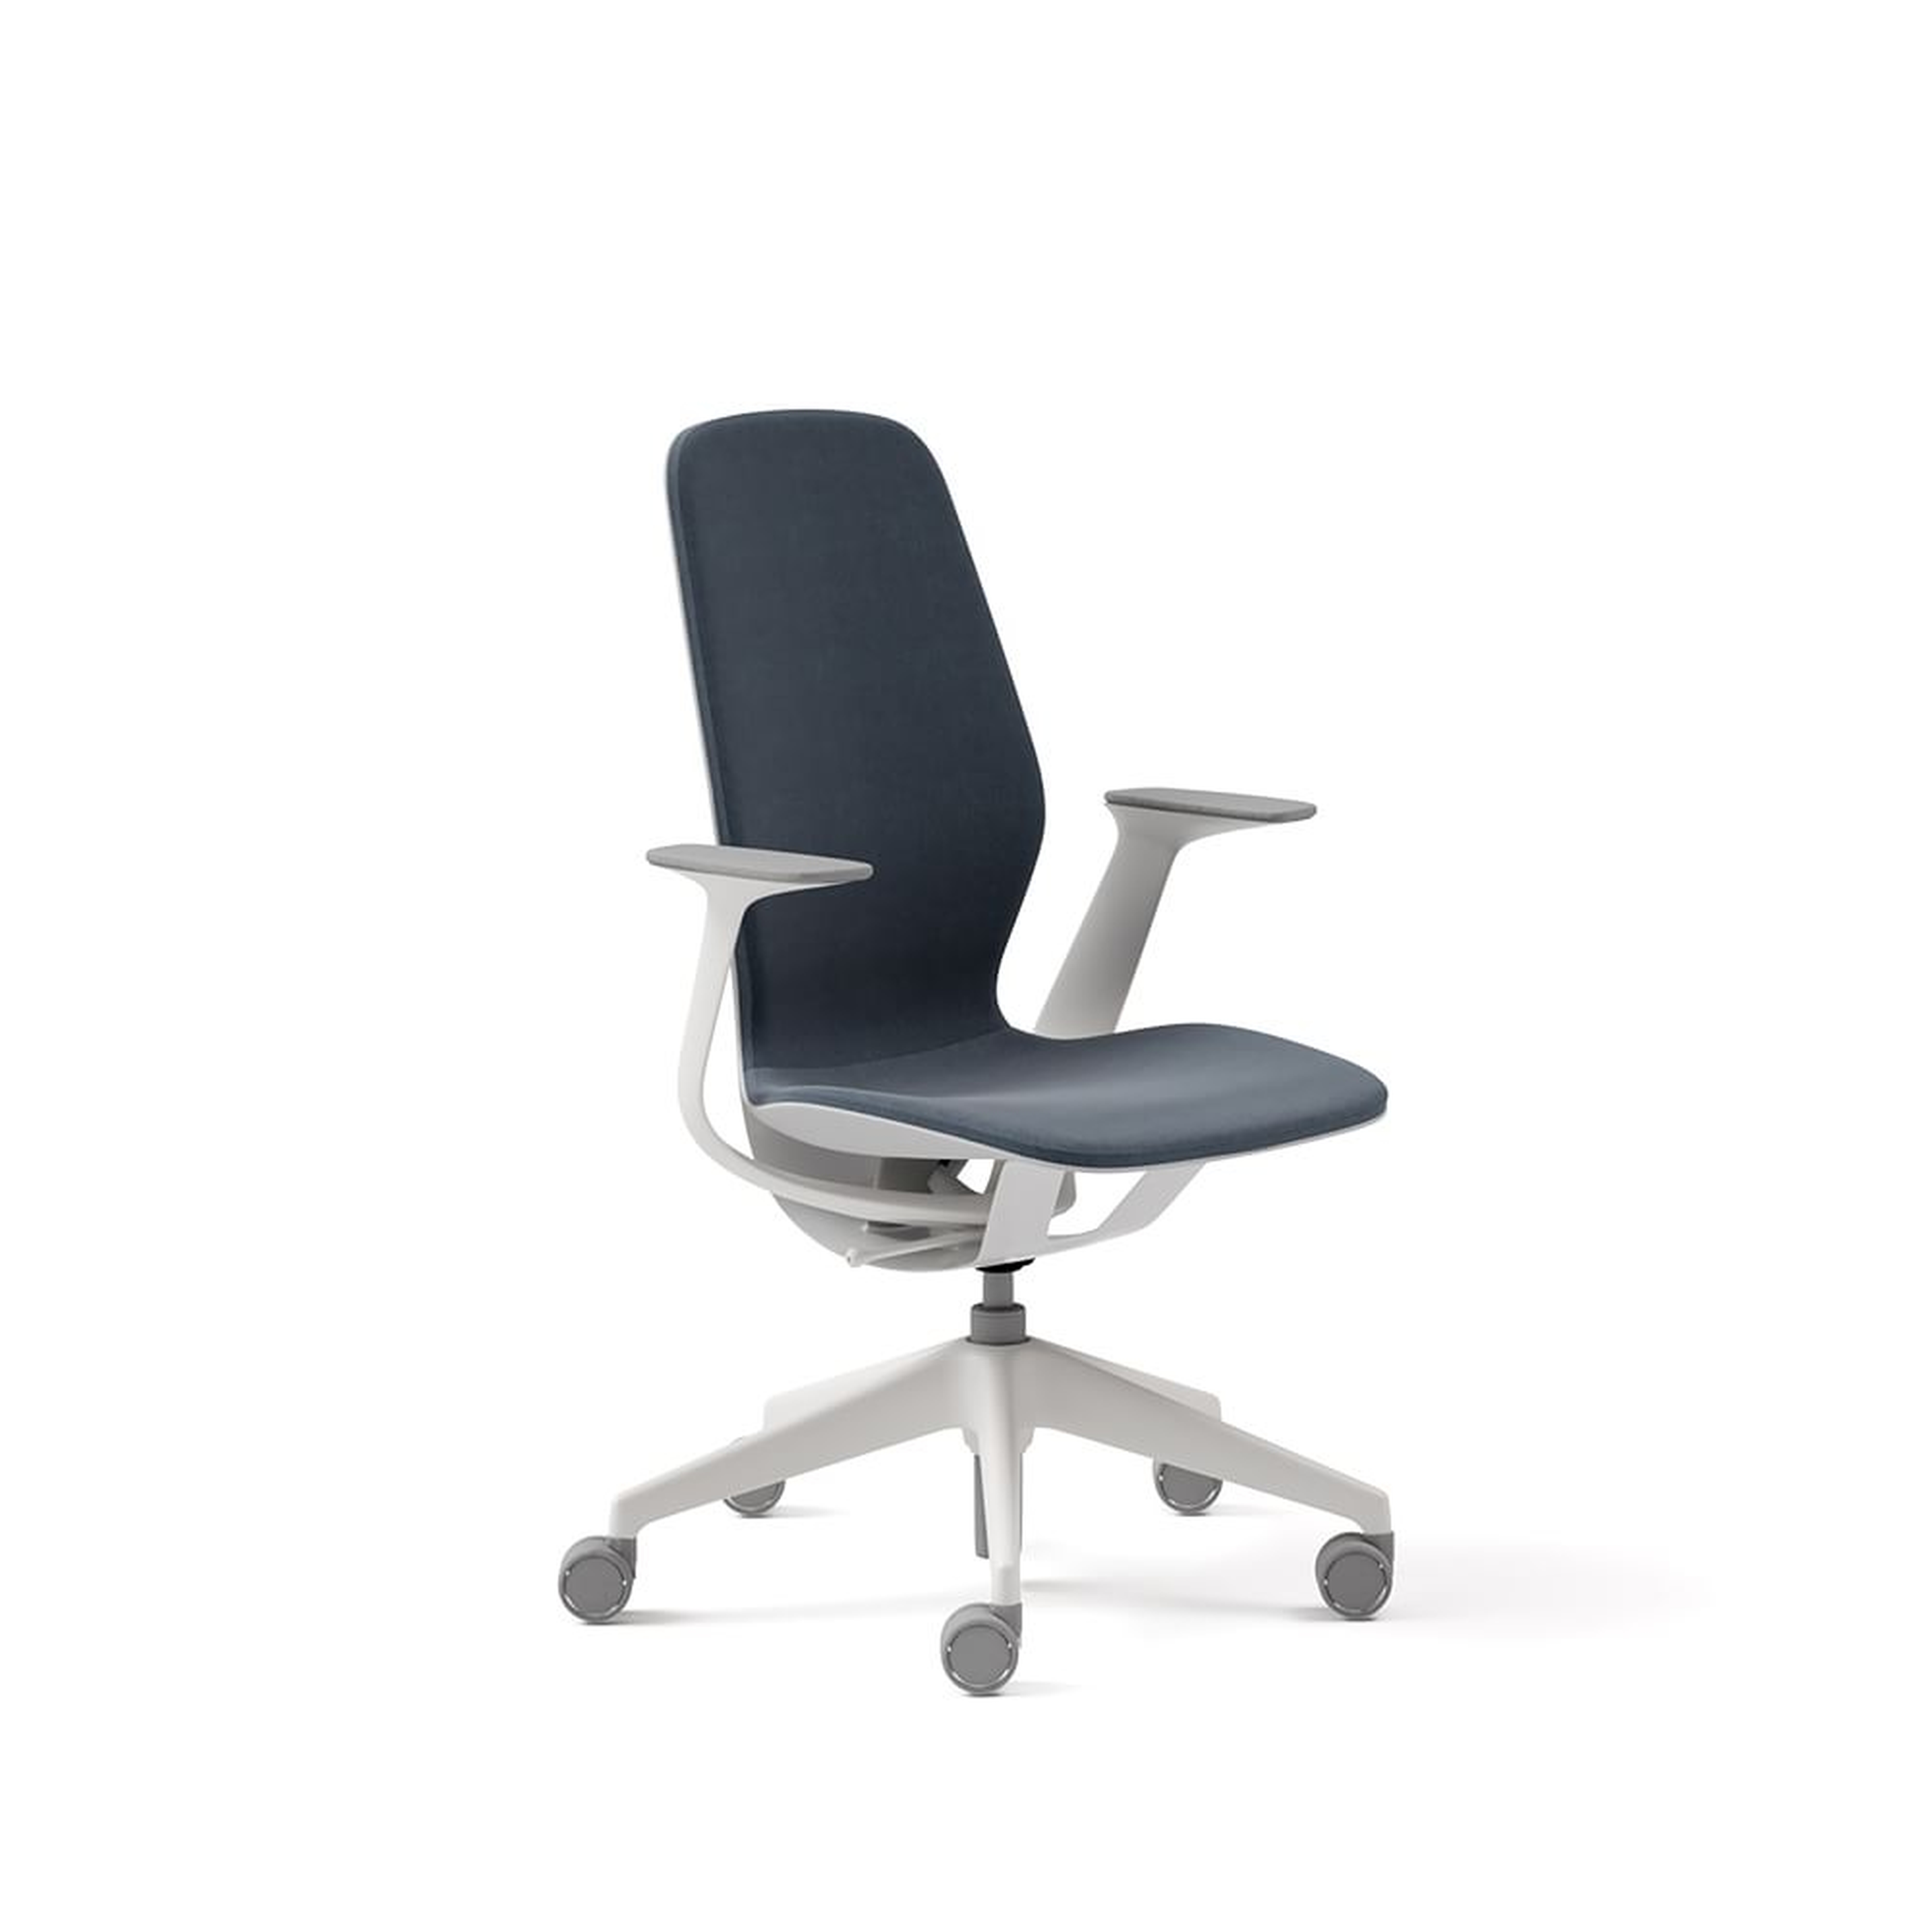 Steelcase Silq Task Chair, Hard Casters Seagull / White Frame Blue Match Back Support / Arms Match Shell - West Elm